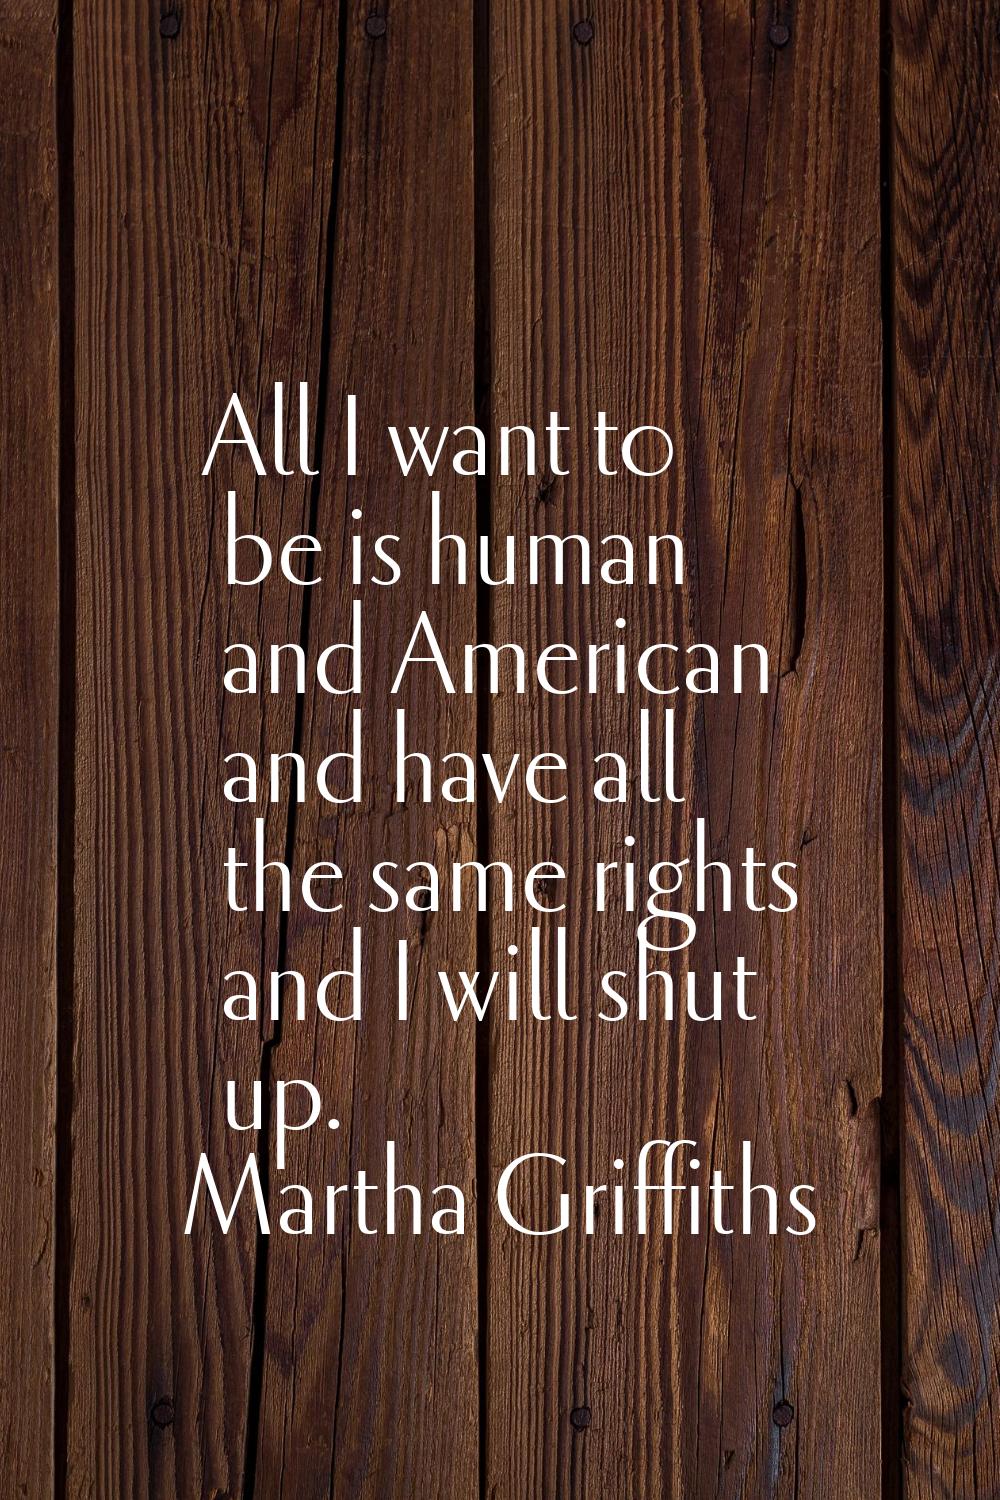 All I want to be is human and American and have all the same rights and I will shut up.